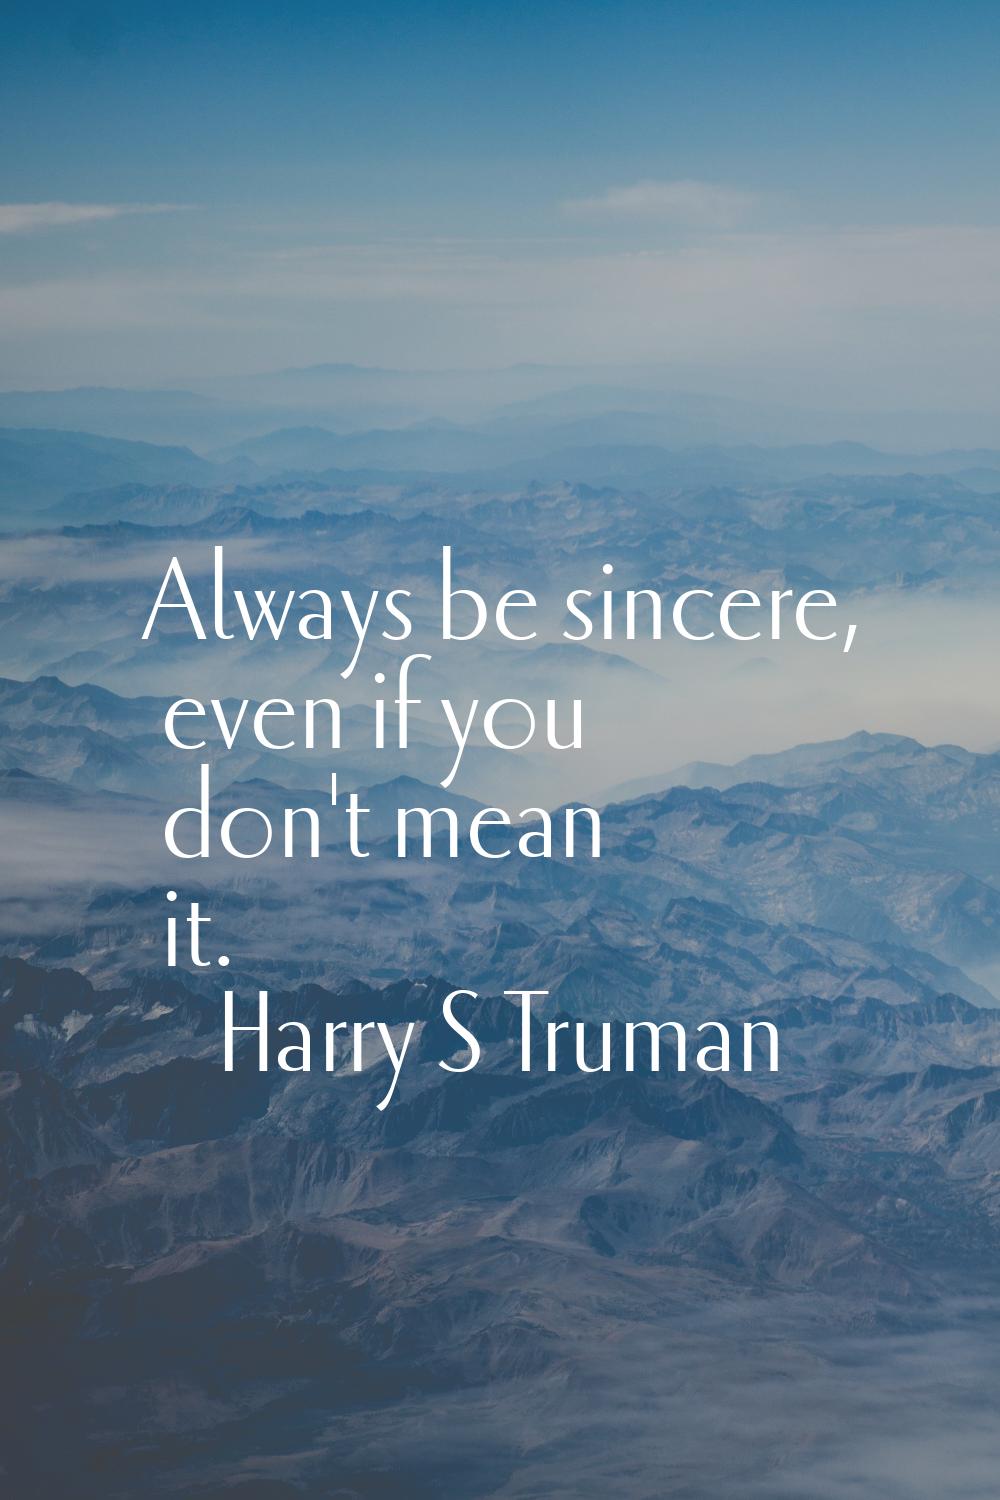 Always be sincere, even if you don't mean it.